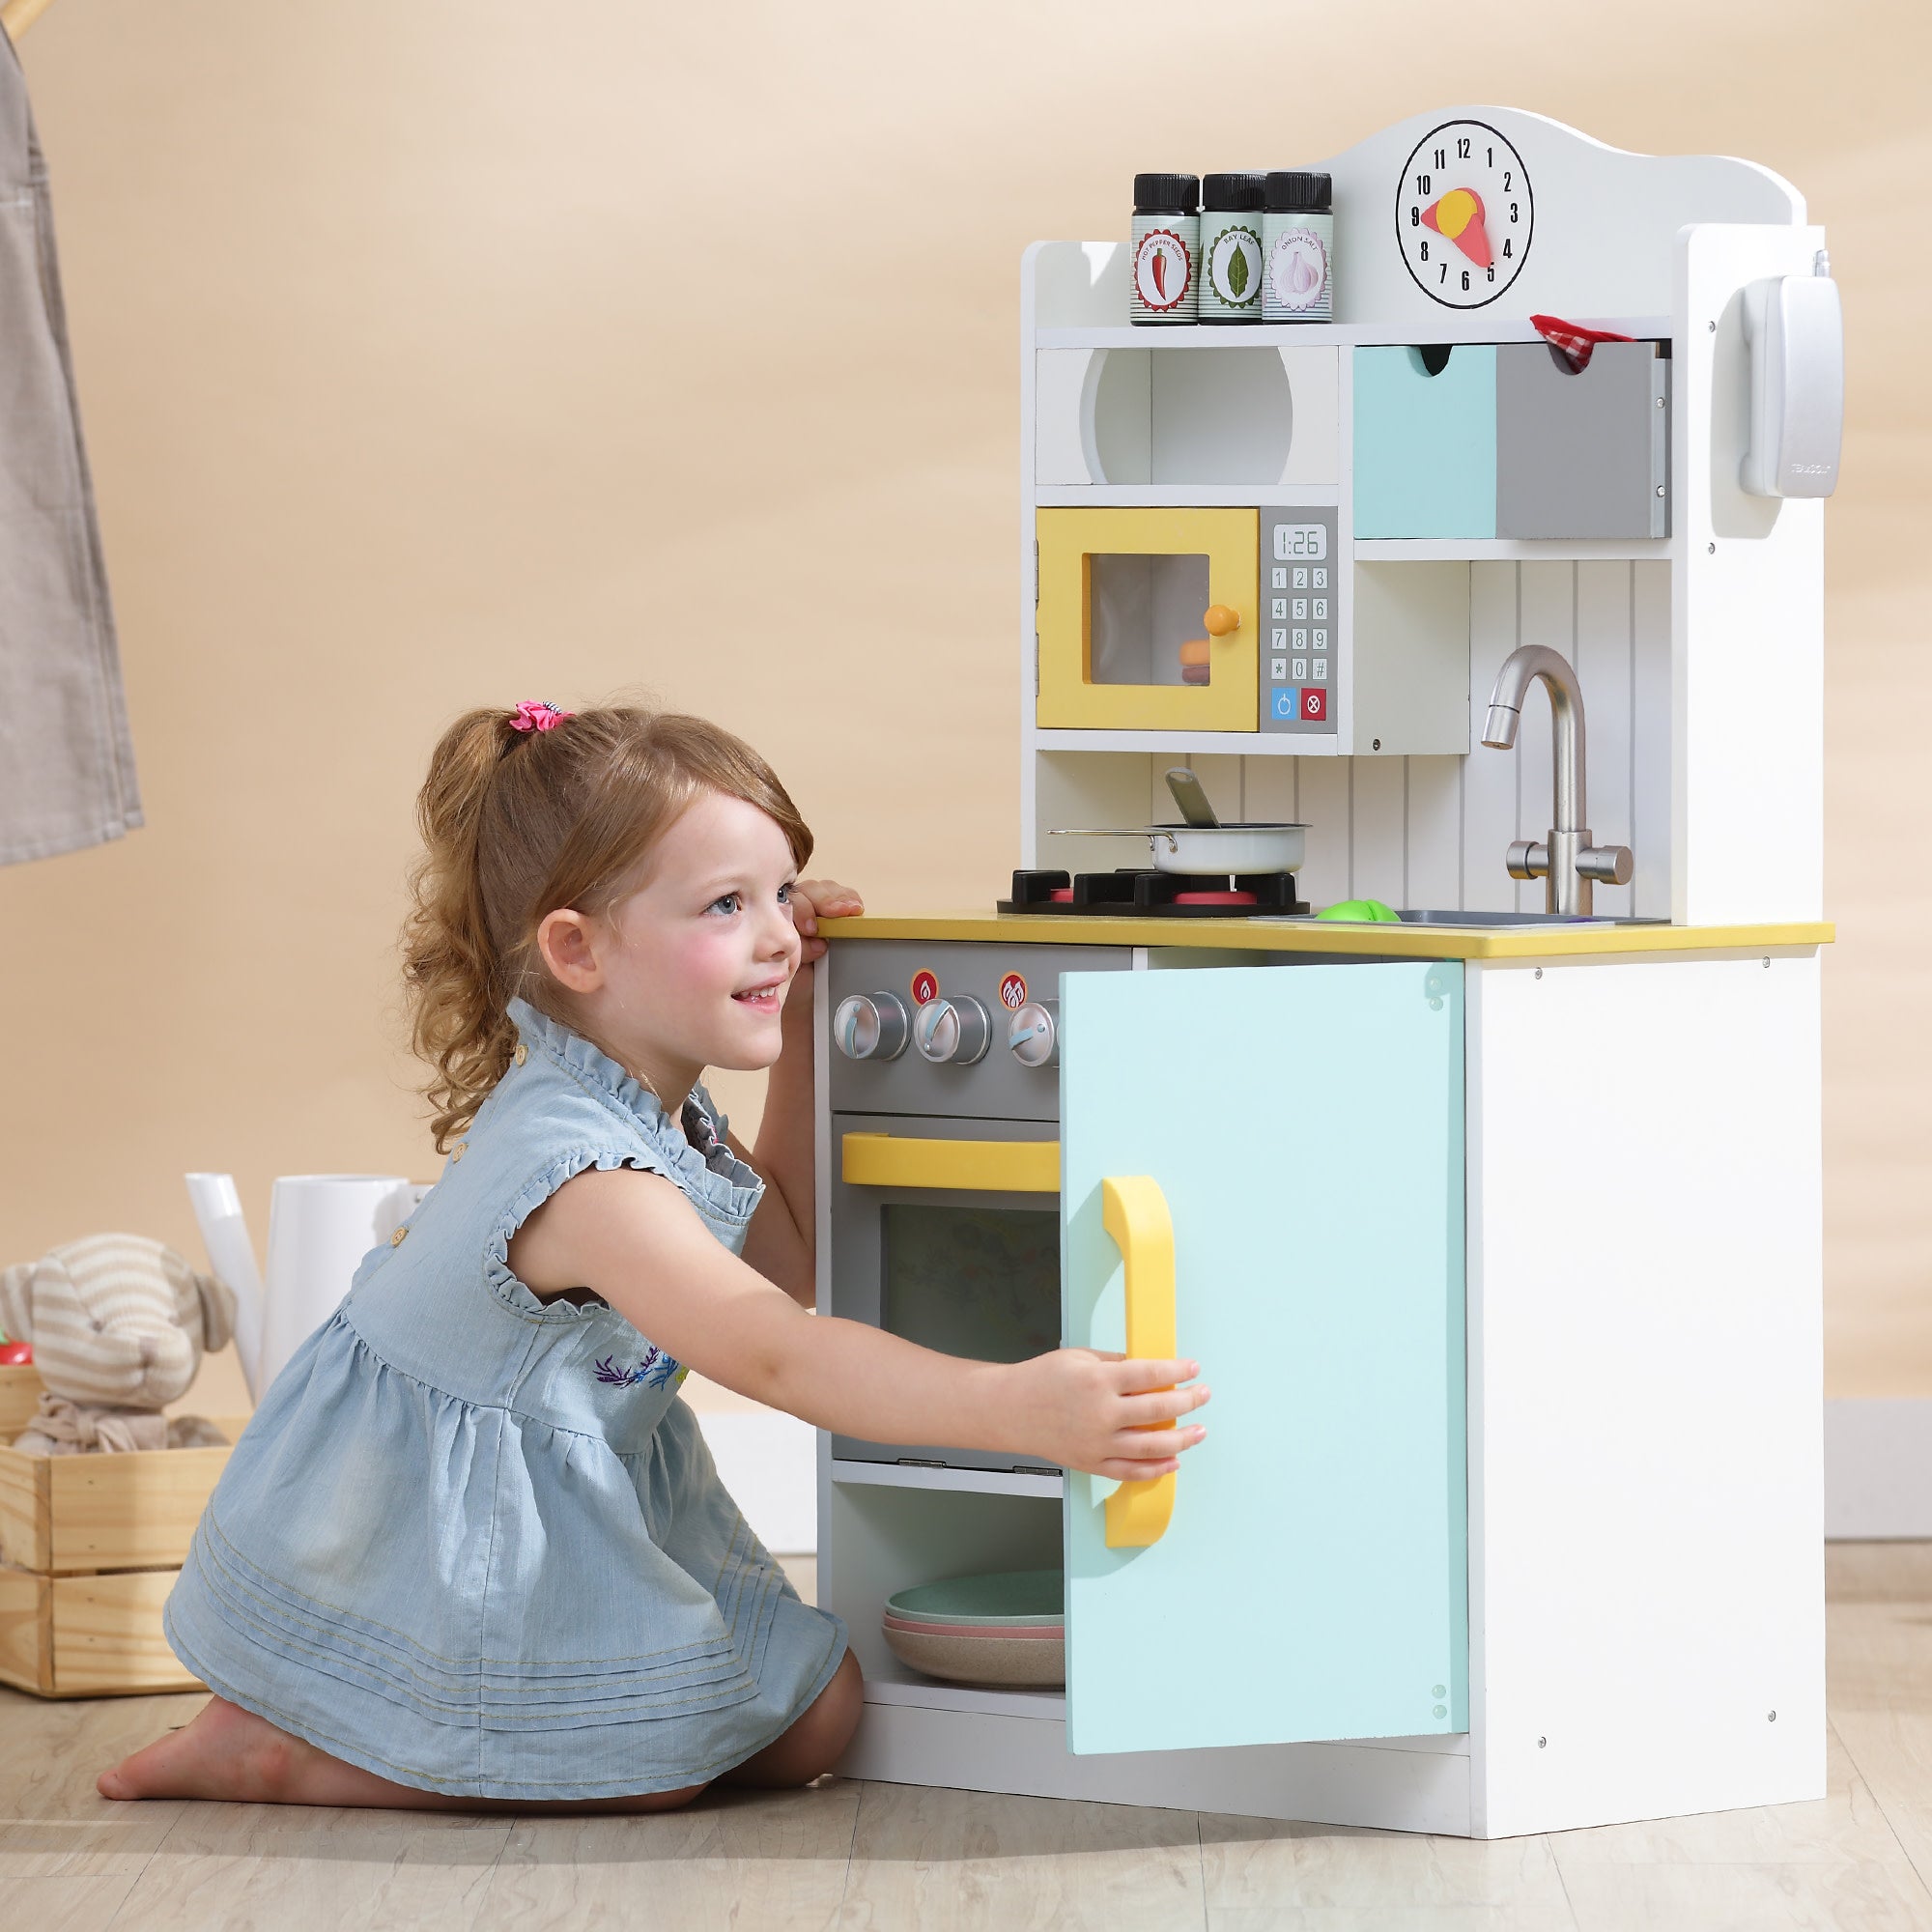 Teamson Kids Little Chef Florence Play Kitchen with Accessories, Multicolor